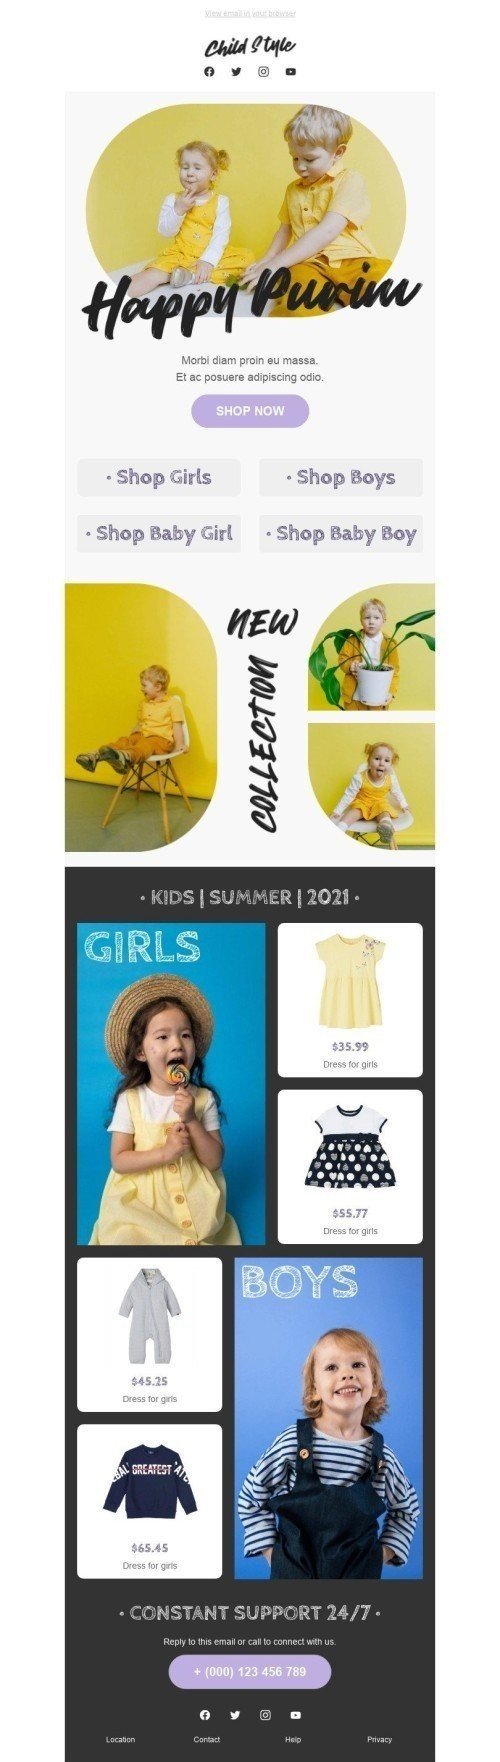 Purim Email Template «Child Style» for Kids Goods industry desktop view